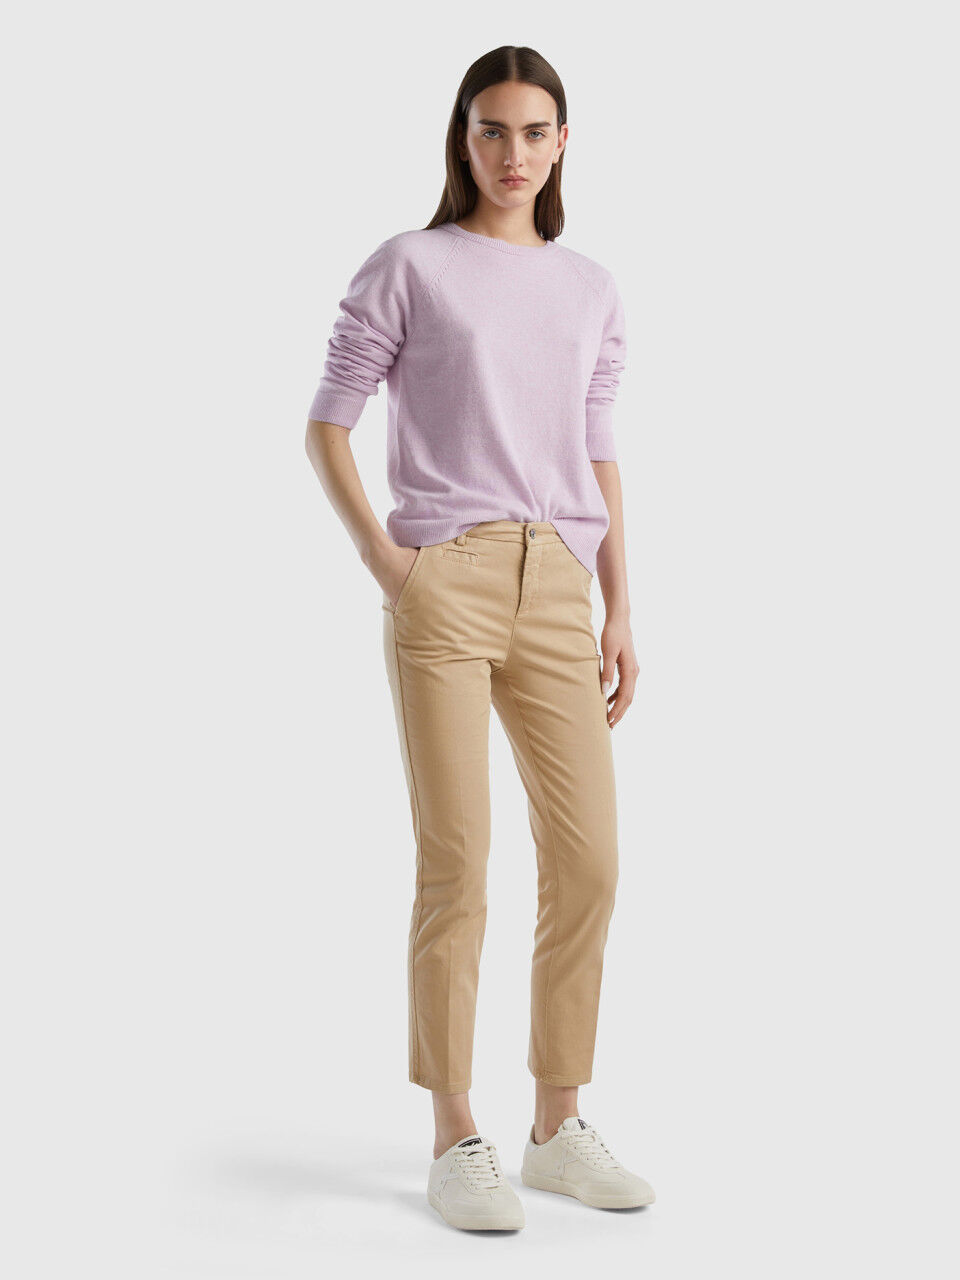 Buy Westwood Beige Cotton Trousers for Women Online @ Tata CLiQ